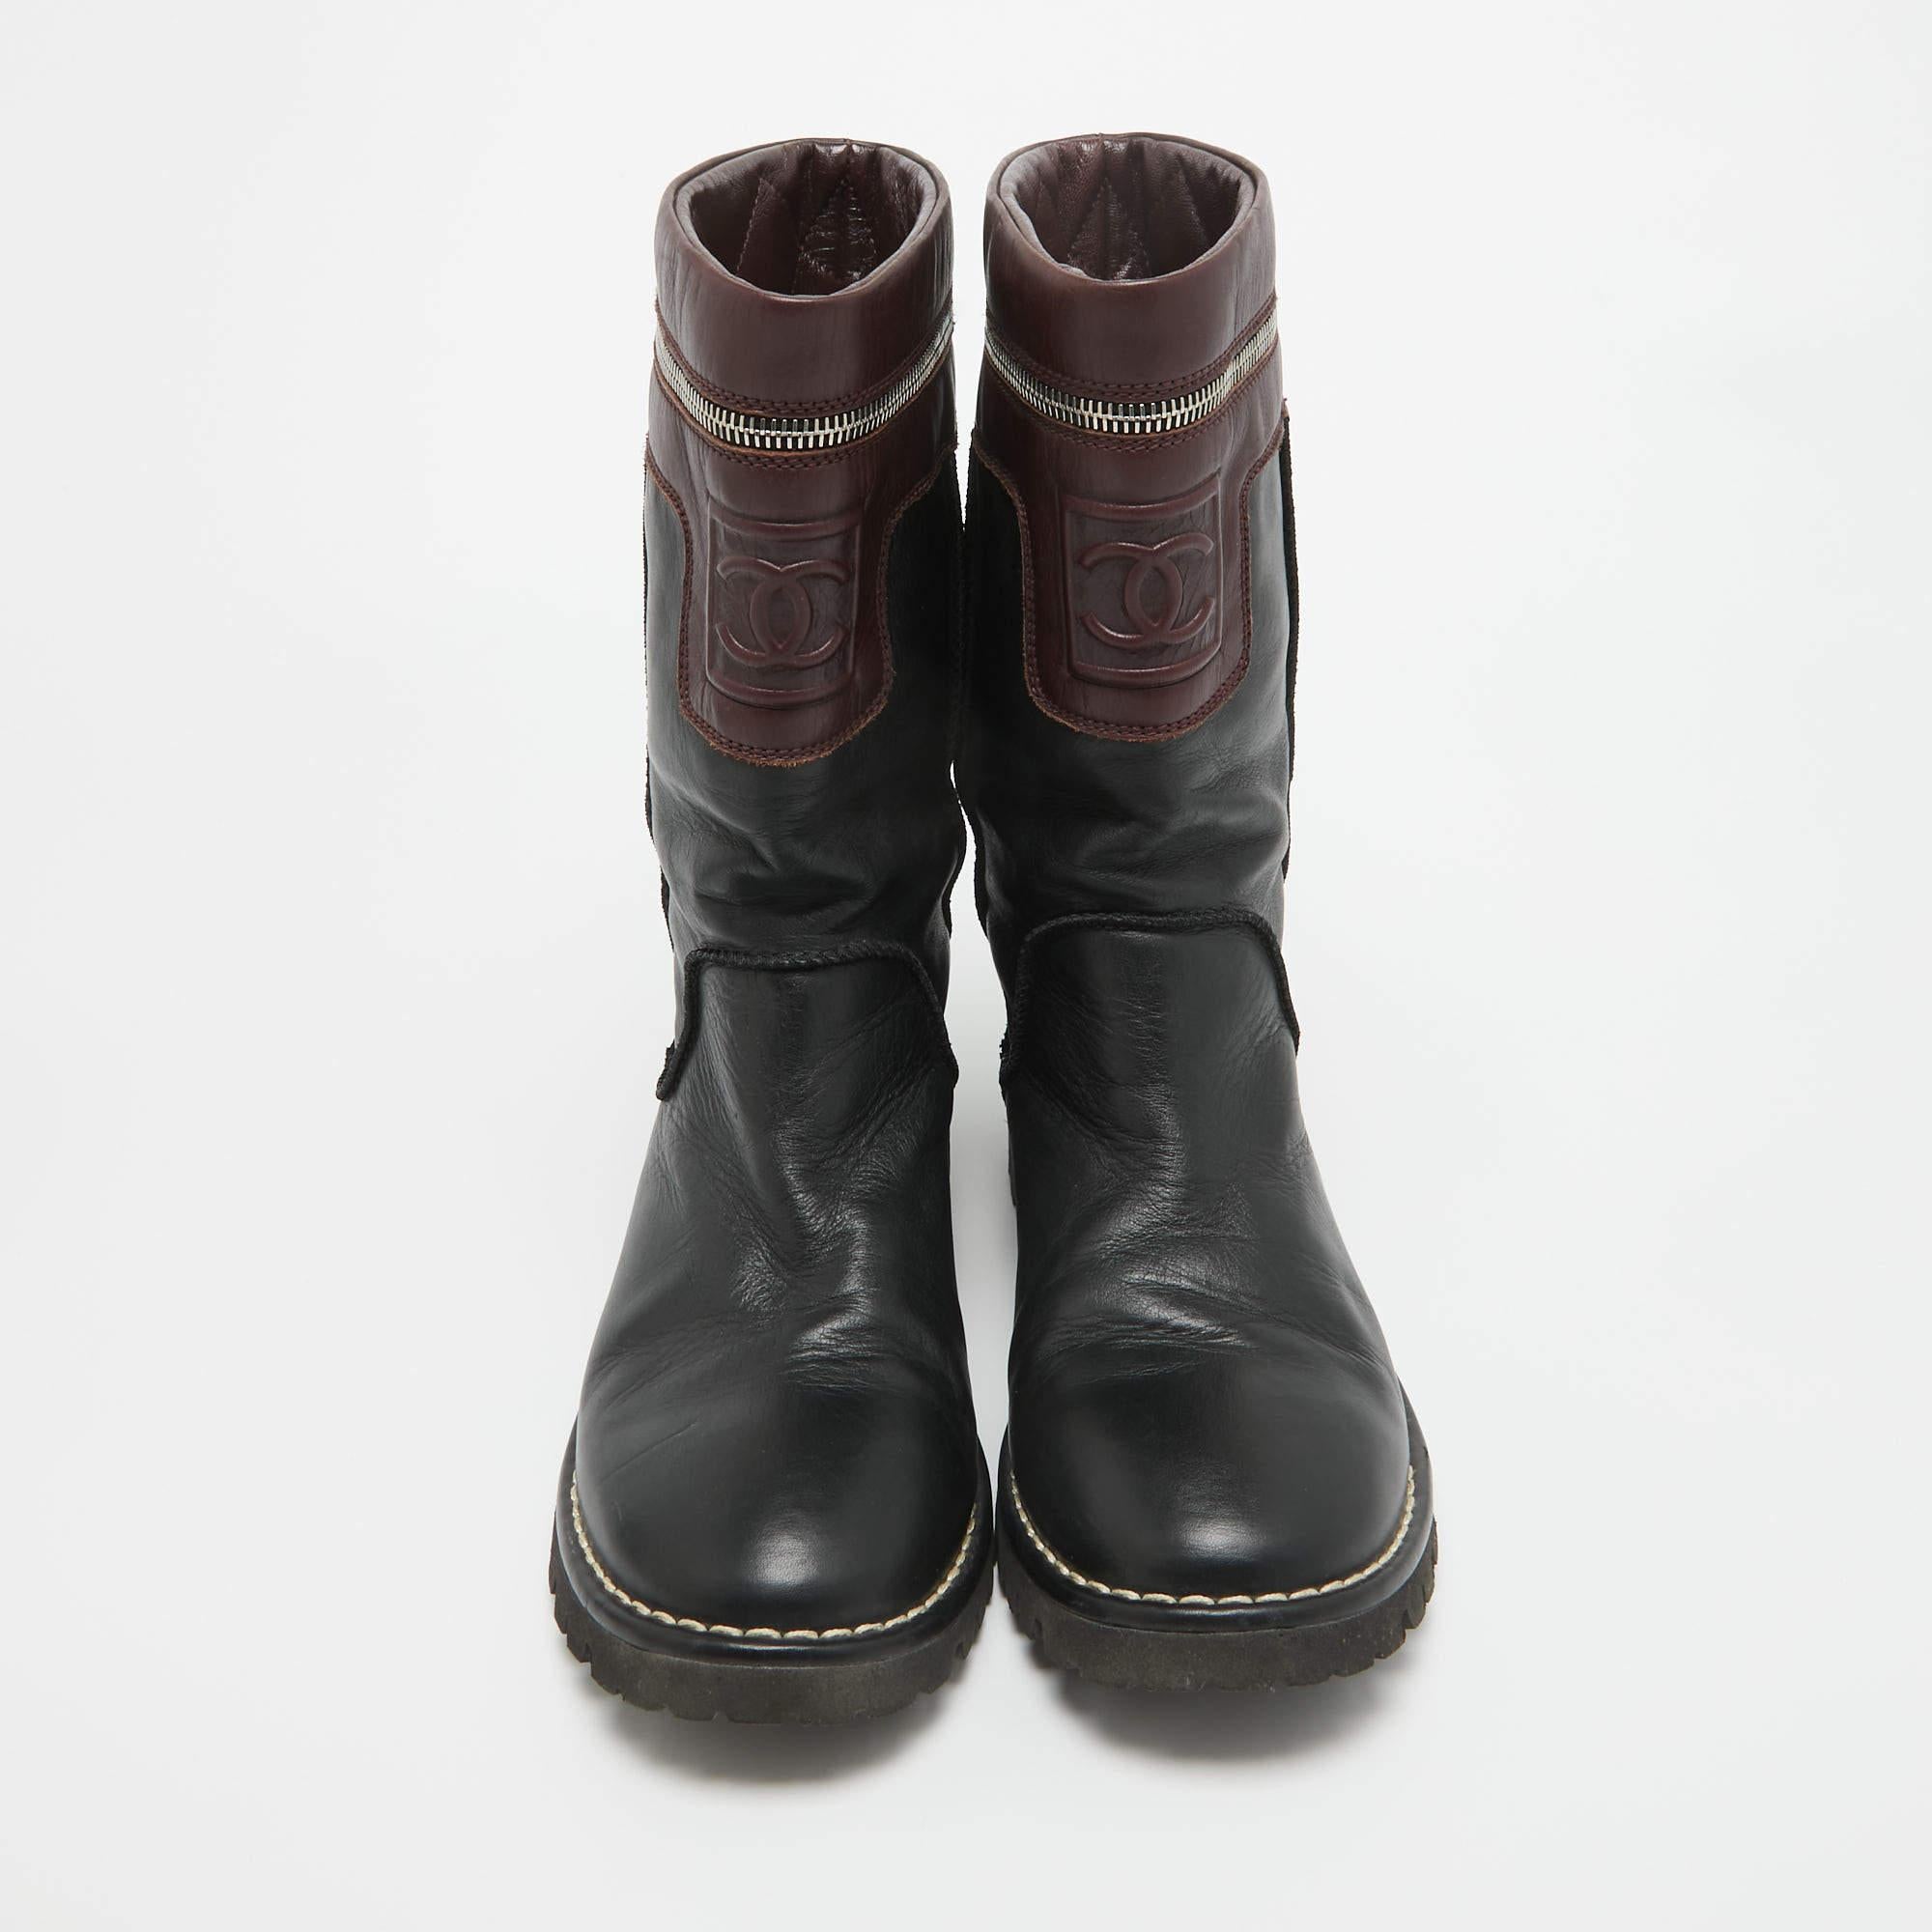 Classy, sturdy, and stylish, these boots from the House of Chanel are all you require to show your luxe fashion taste! They are designed using black-burgundy leather into a mid-calf silhouette. They showcase silver-tone hardware and a slip-on style.